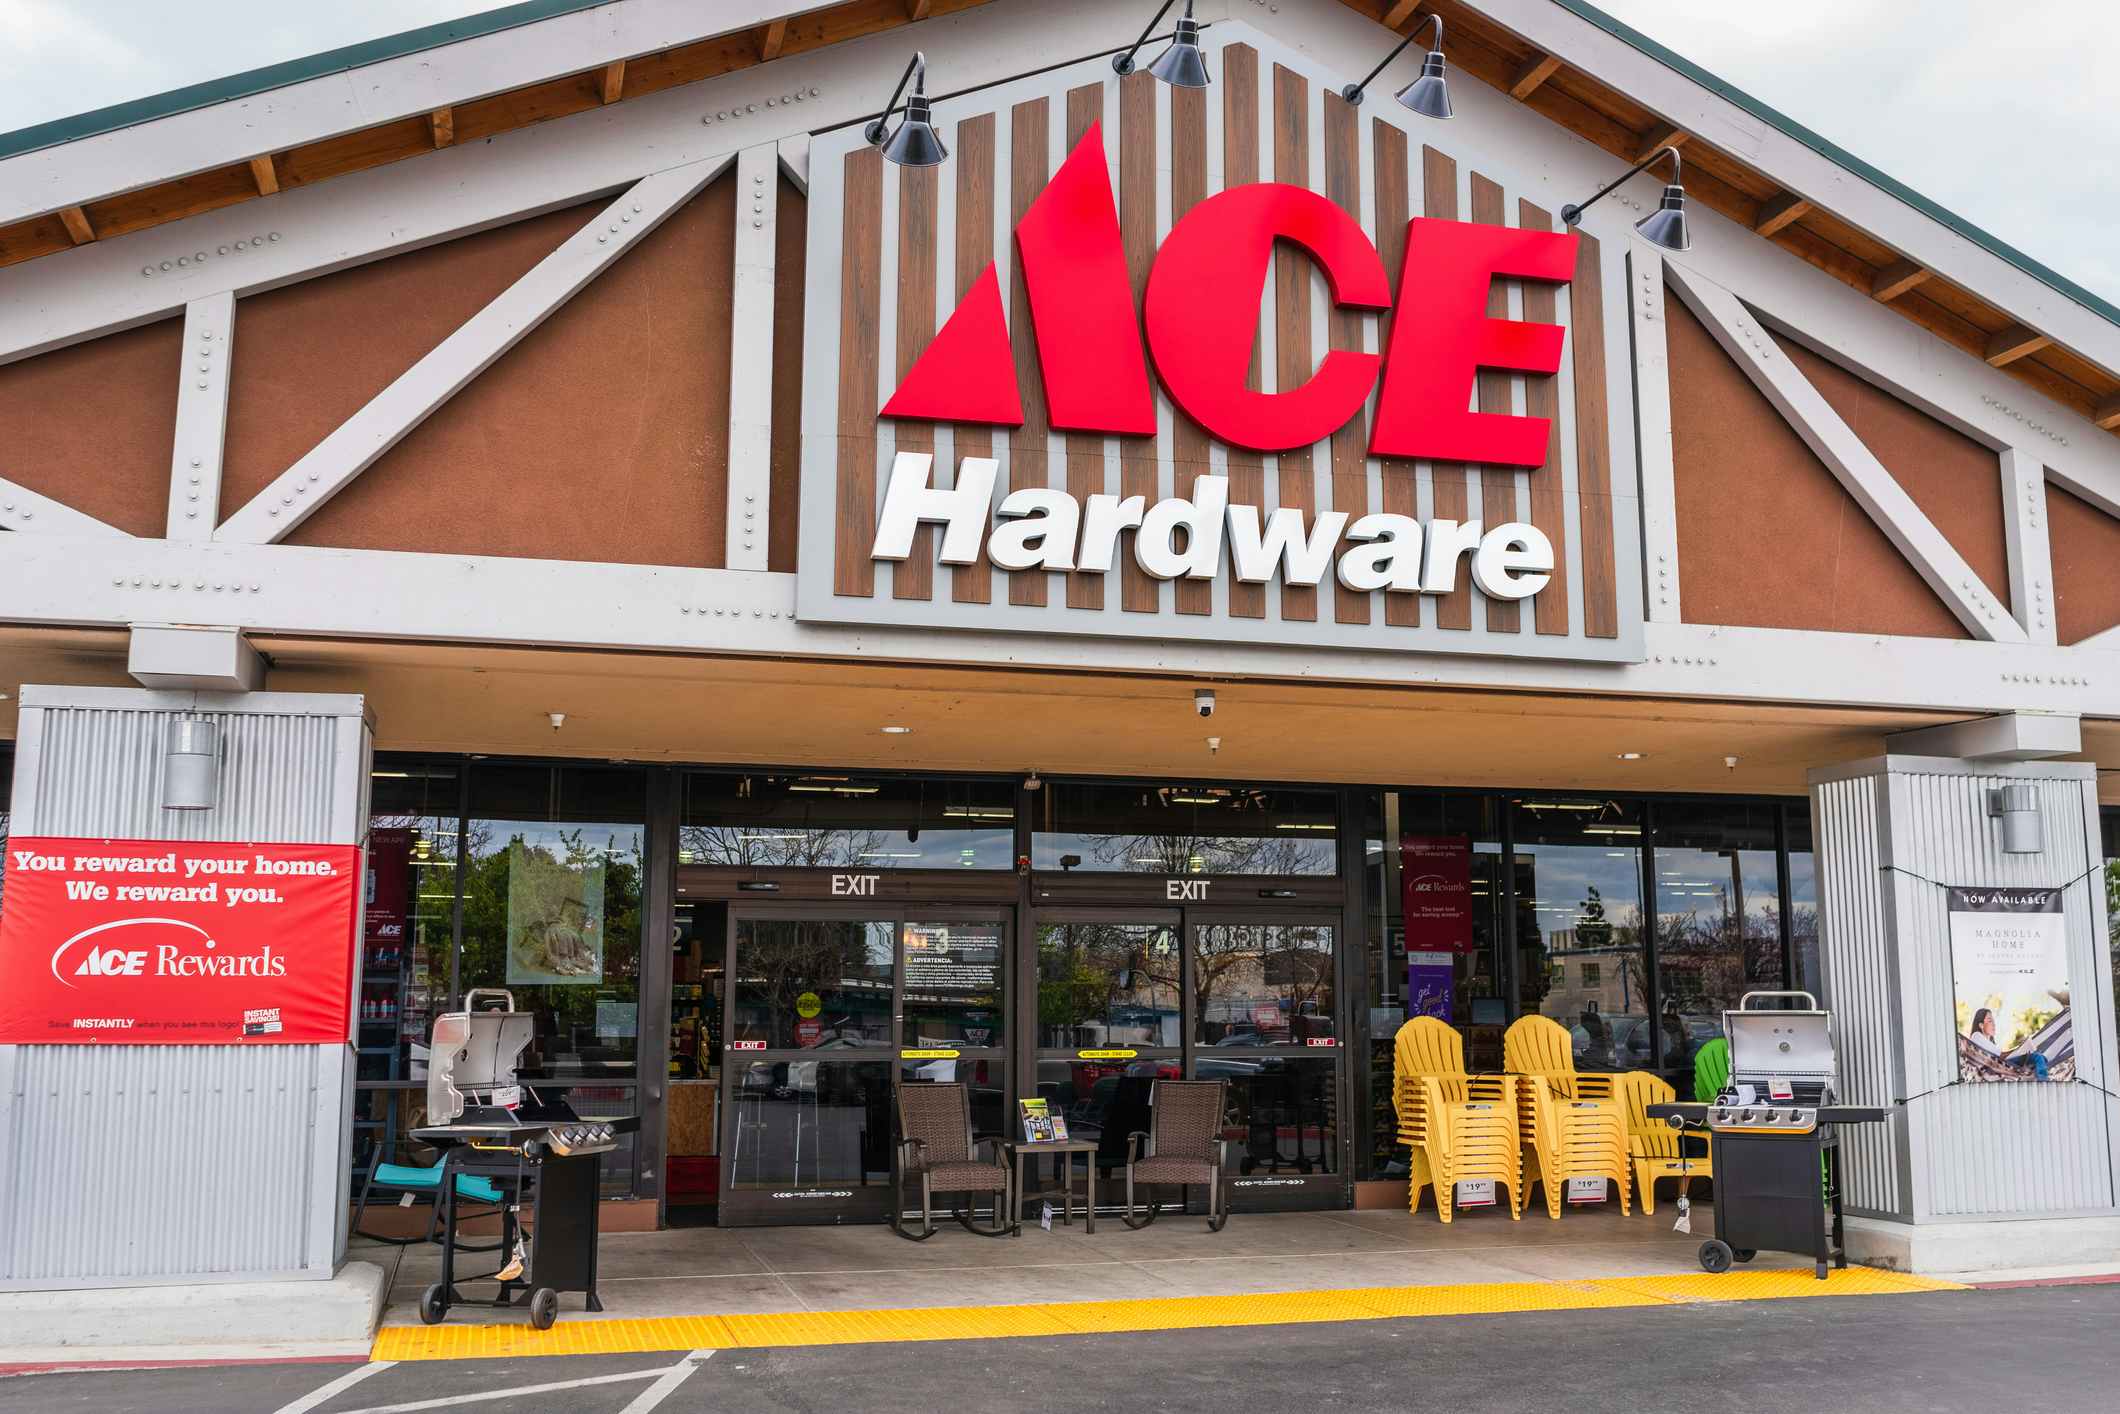 An Ace Hardware store entrance with outdoor chairs and grills on display